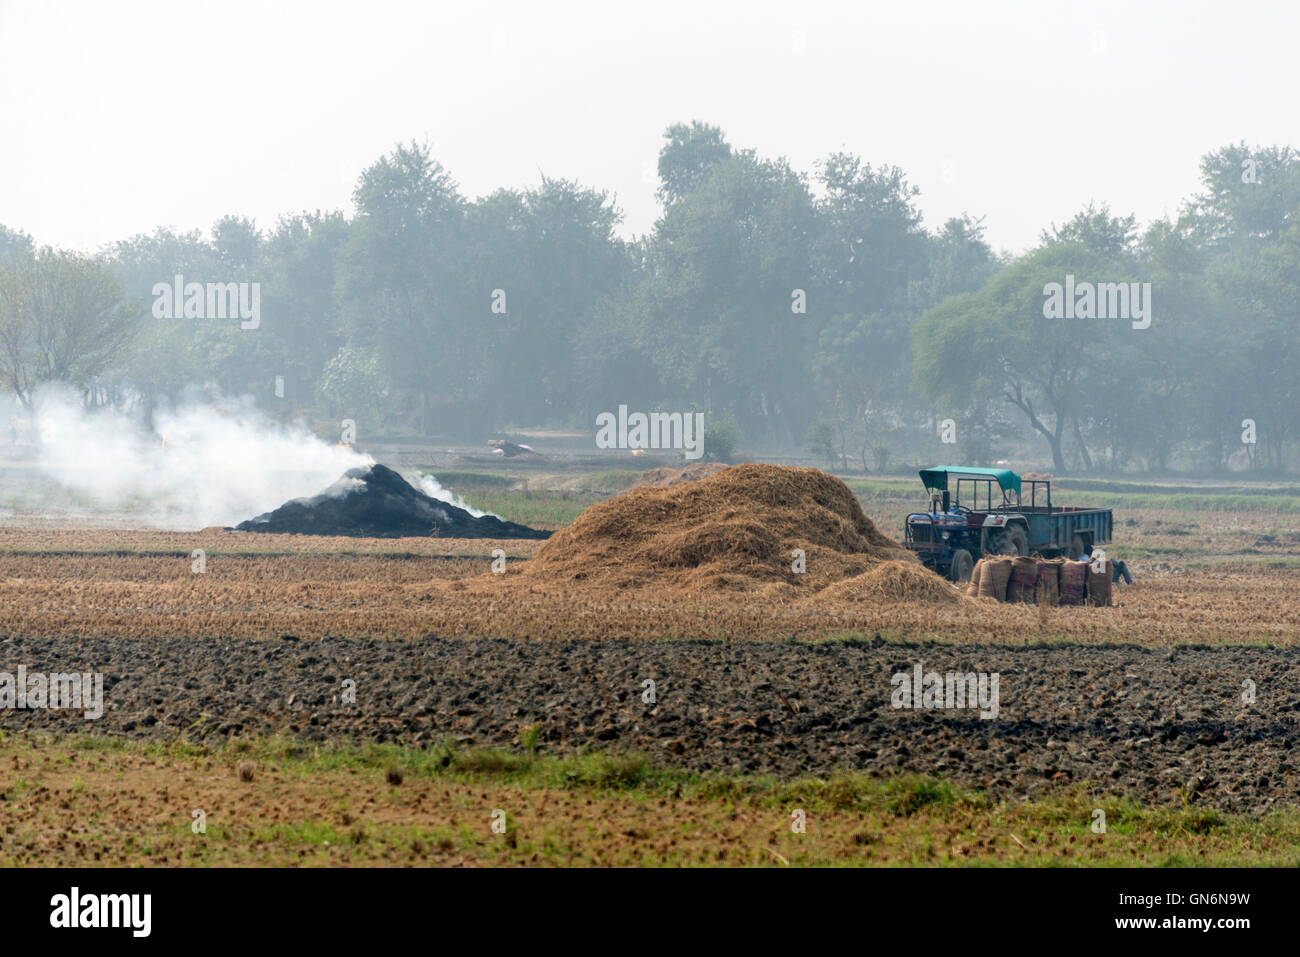 Indian farmers burning hay and straw contributed to the thick smog over Delhi and Agra in India. Stock Photo